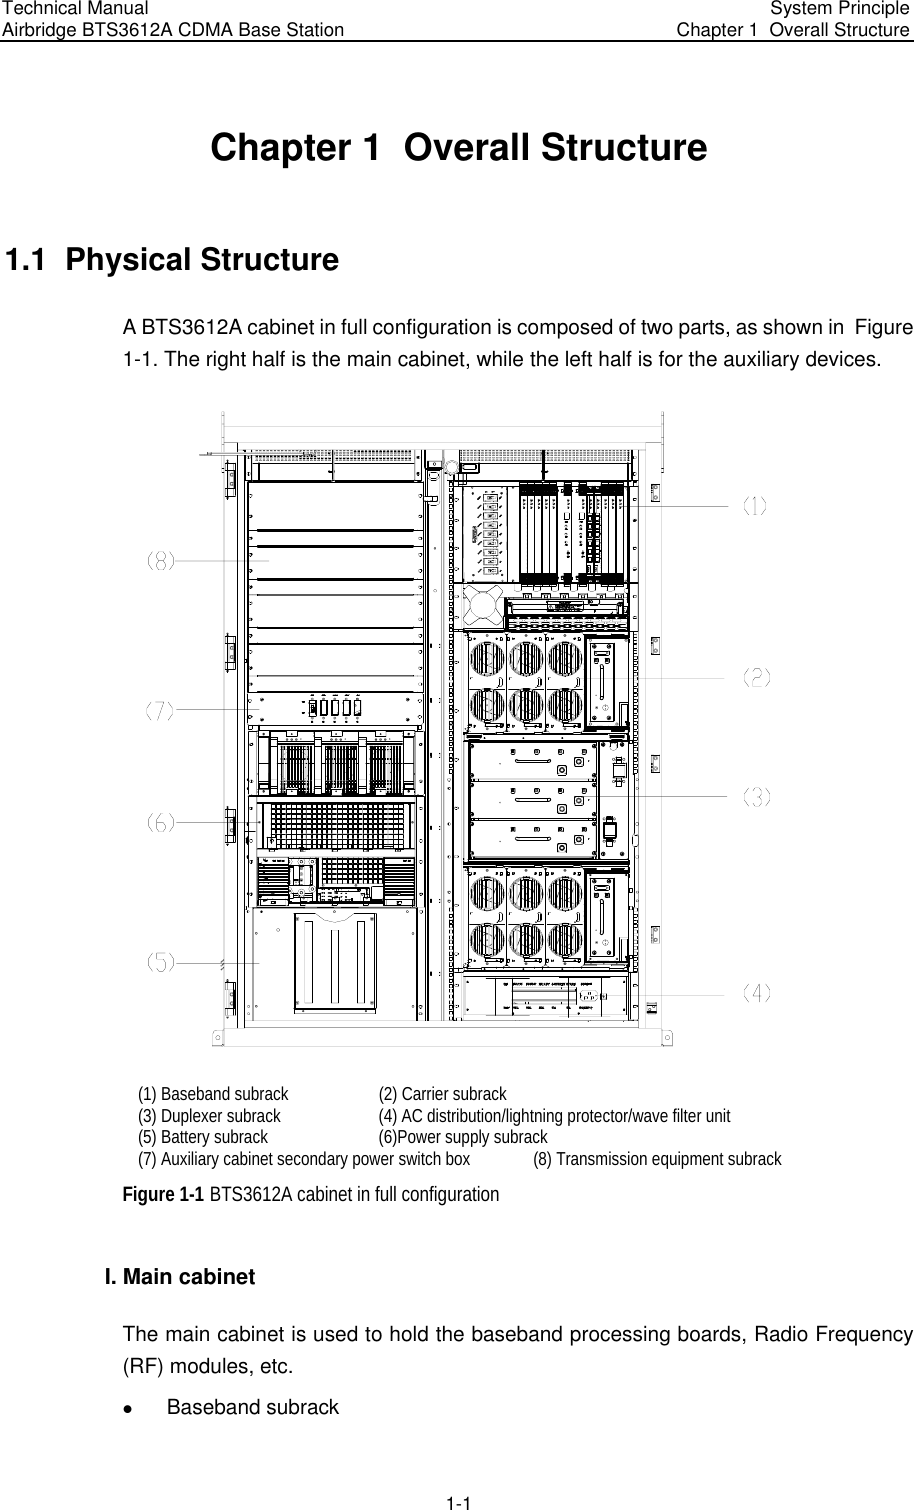 Technical Manual  Airbridge BTS3612A CDMA Base Station  System Principle Chapter 1  Overall Structure  1-1 Chapter 1  Overall Structure 1.1  Physical Structure A BTS3612A cabinet in full configuration is composed of two parts, as shown in  Figure 1-1. The right half is the main cabinet, while the left half is for the auxiliary devices.  (1) Baseband subrack  (2) Carrier subrack   (3) Duplexer subrack  (4) AC distribution/lightning protector/wave filter unit (5) Battery subrack  (6)Power supply subrack (7) Auxiliary cabinet secondary power switch box  (8) Transmission equipment subrack Figure 1-1 BTS3612A cabinet in full configuration I. Main cabinet The main cabinet is used to hold the baseband processing boards, Radio Frequency (RF) modules, etc. z Baseband subrack 